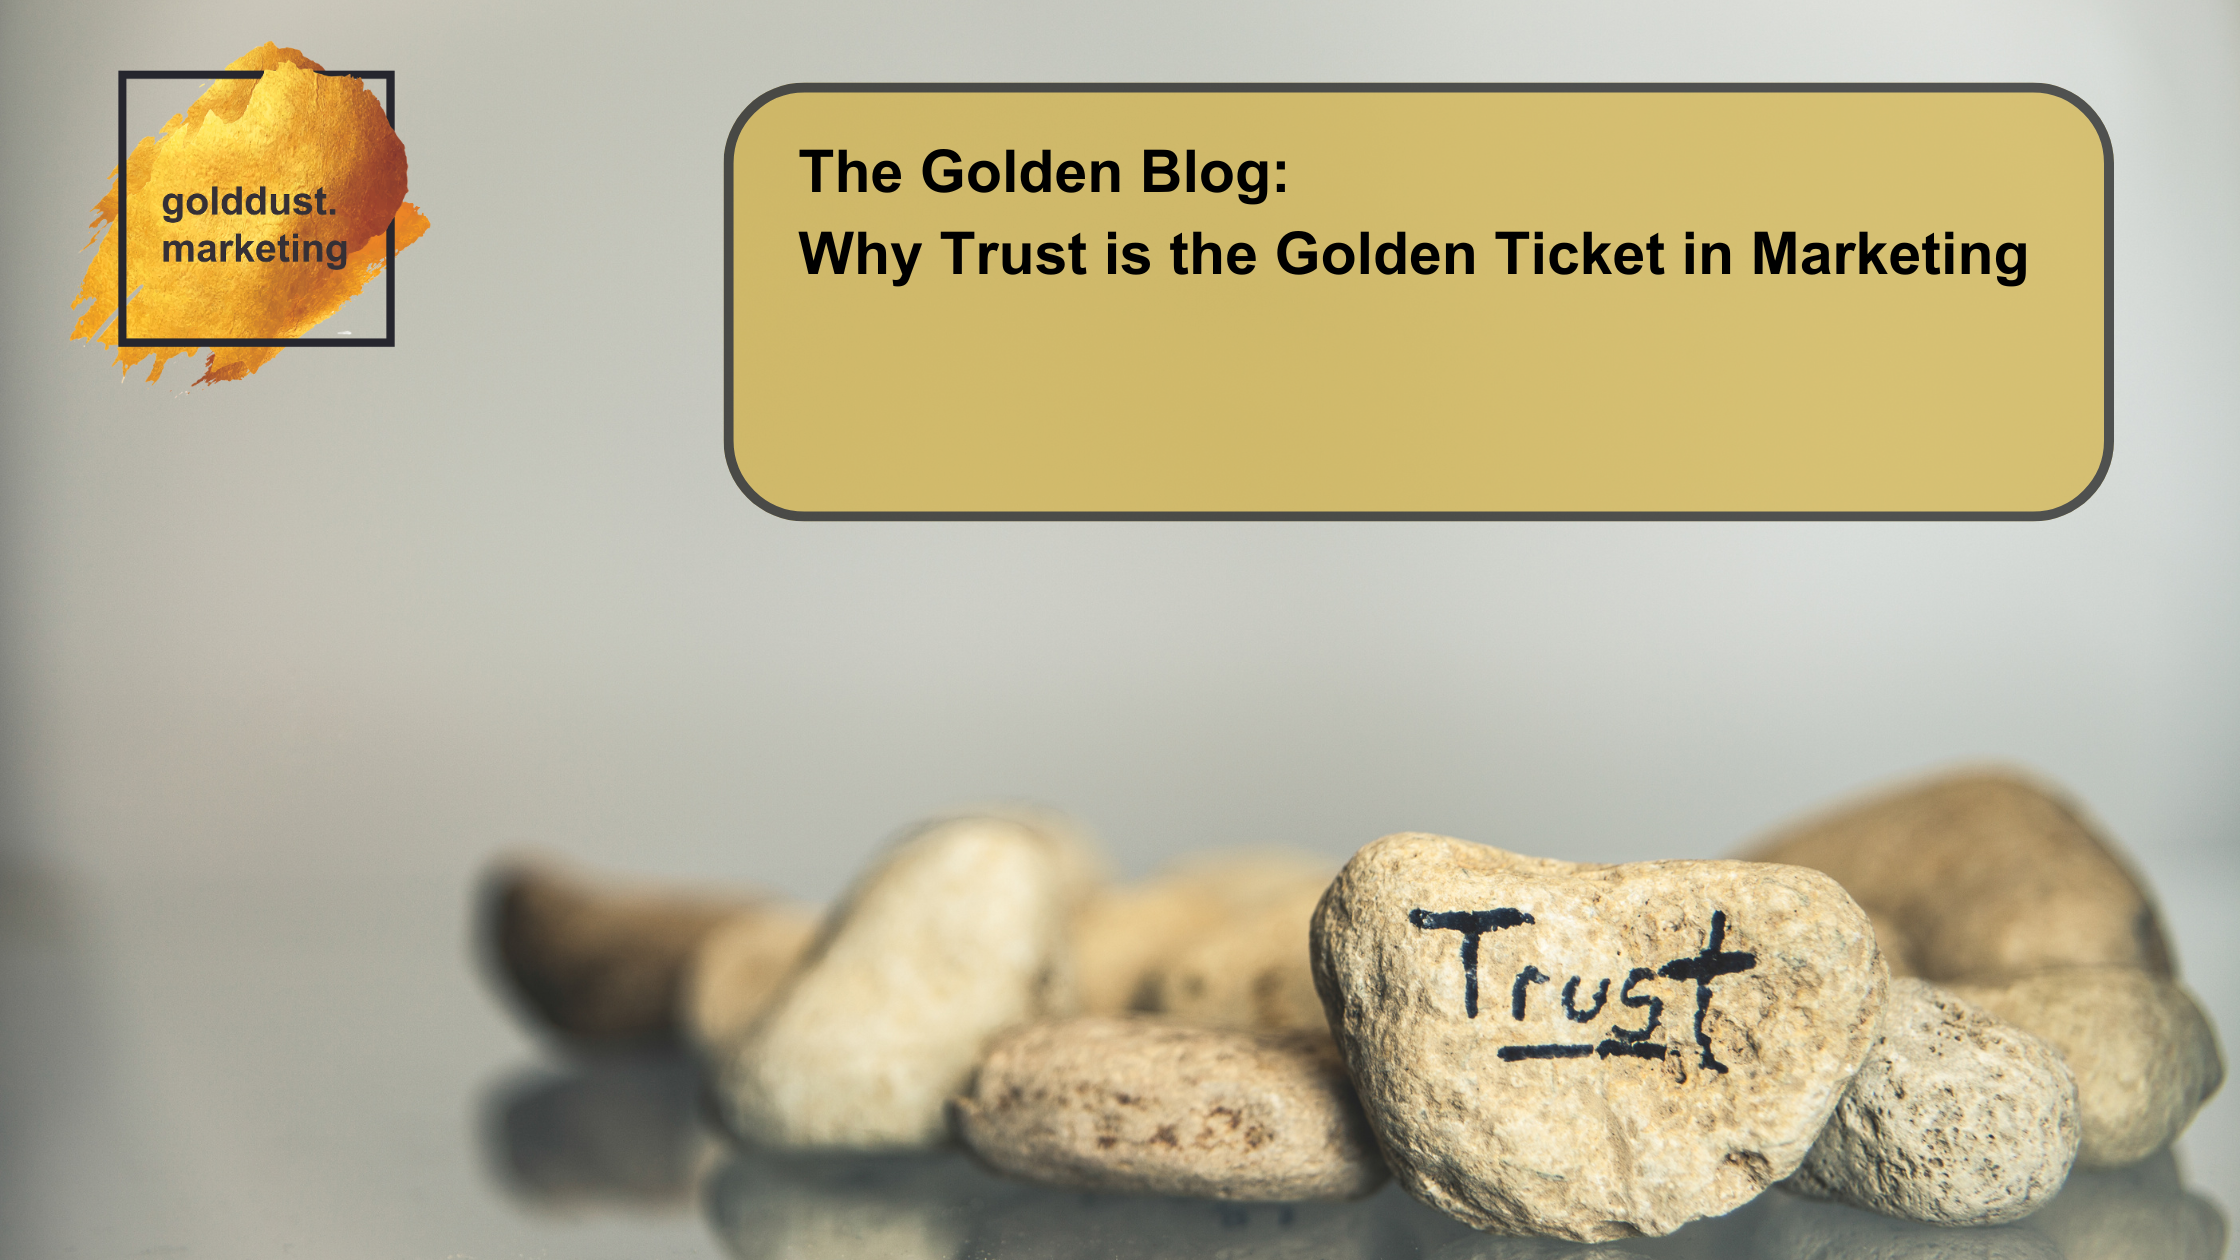 Why Trust is the Golden Ticket in Marketing